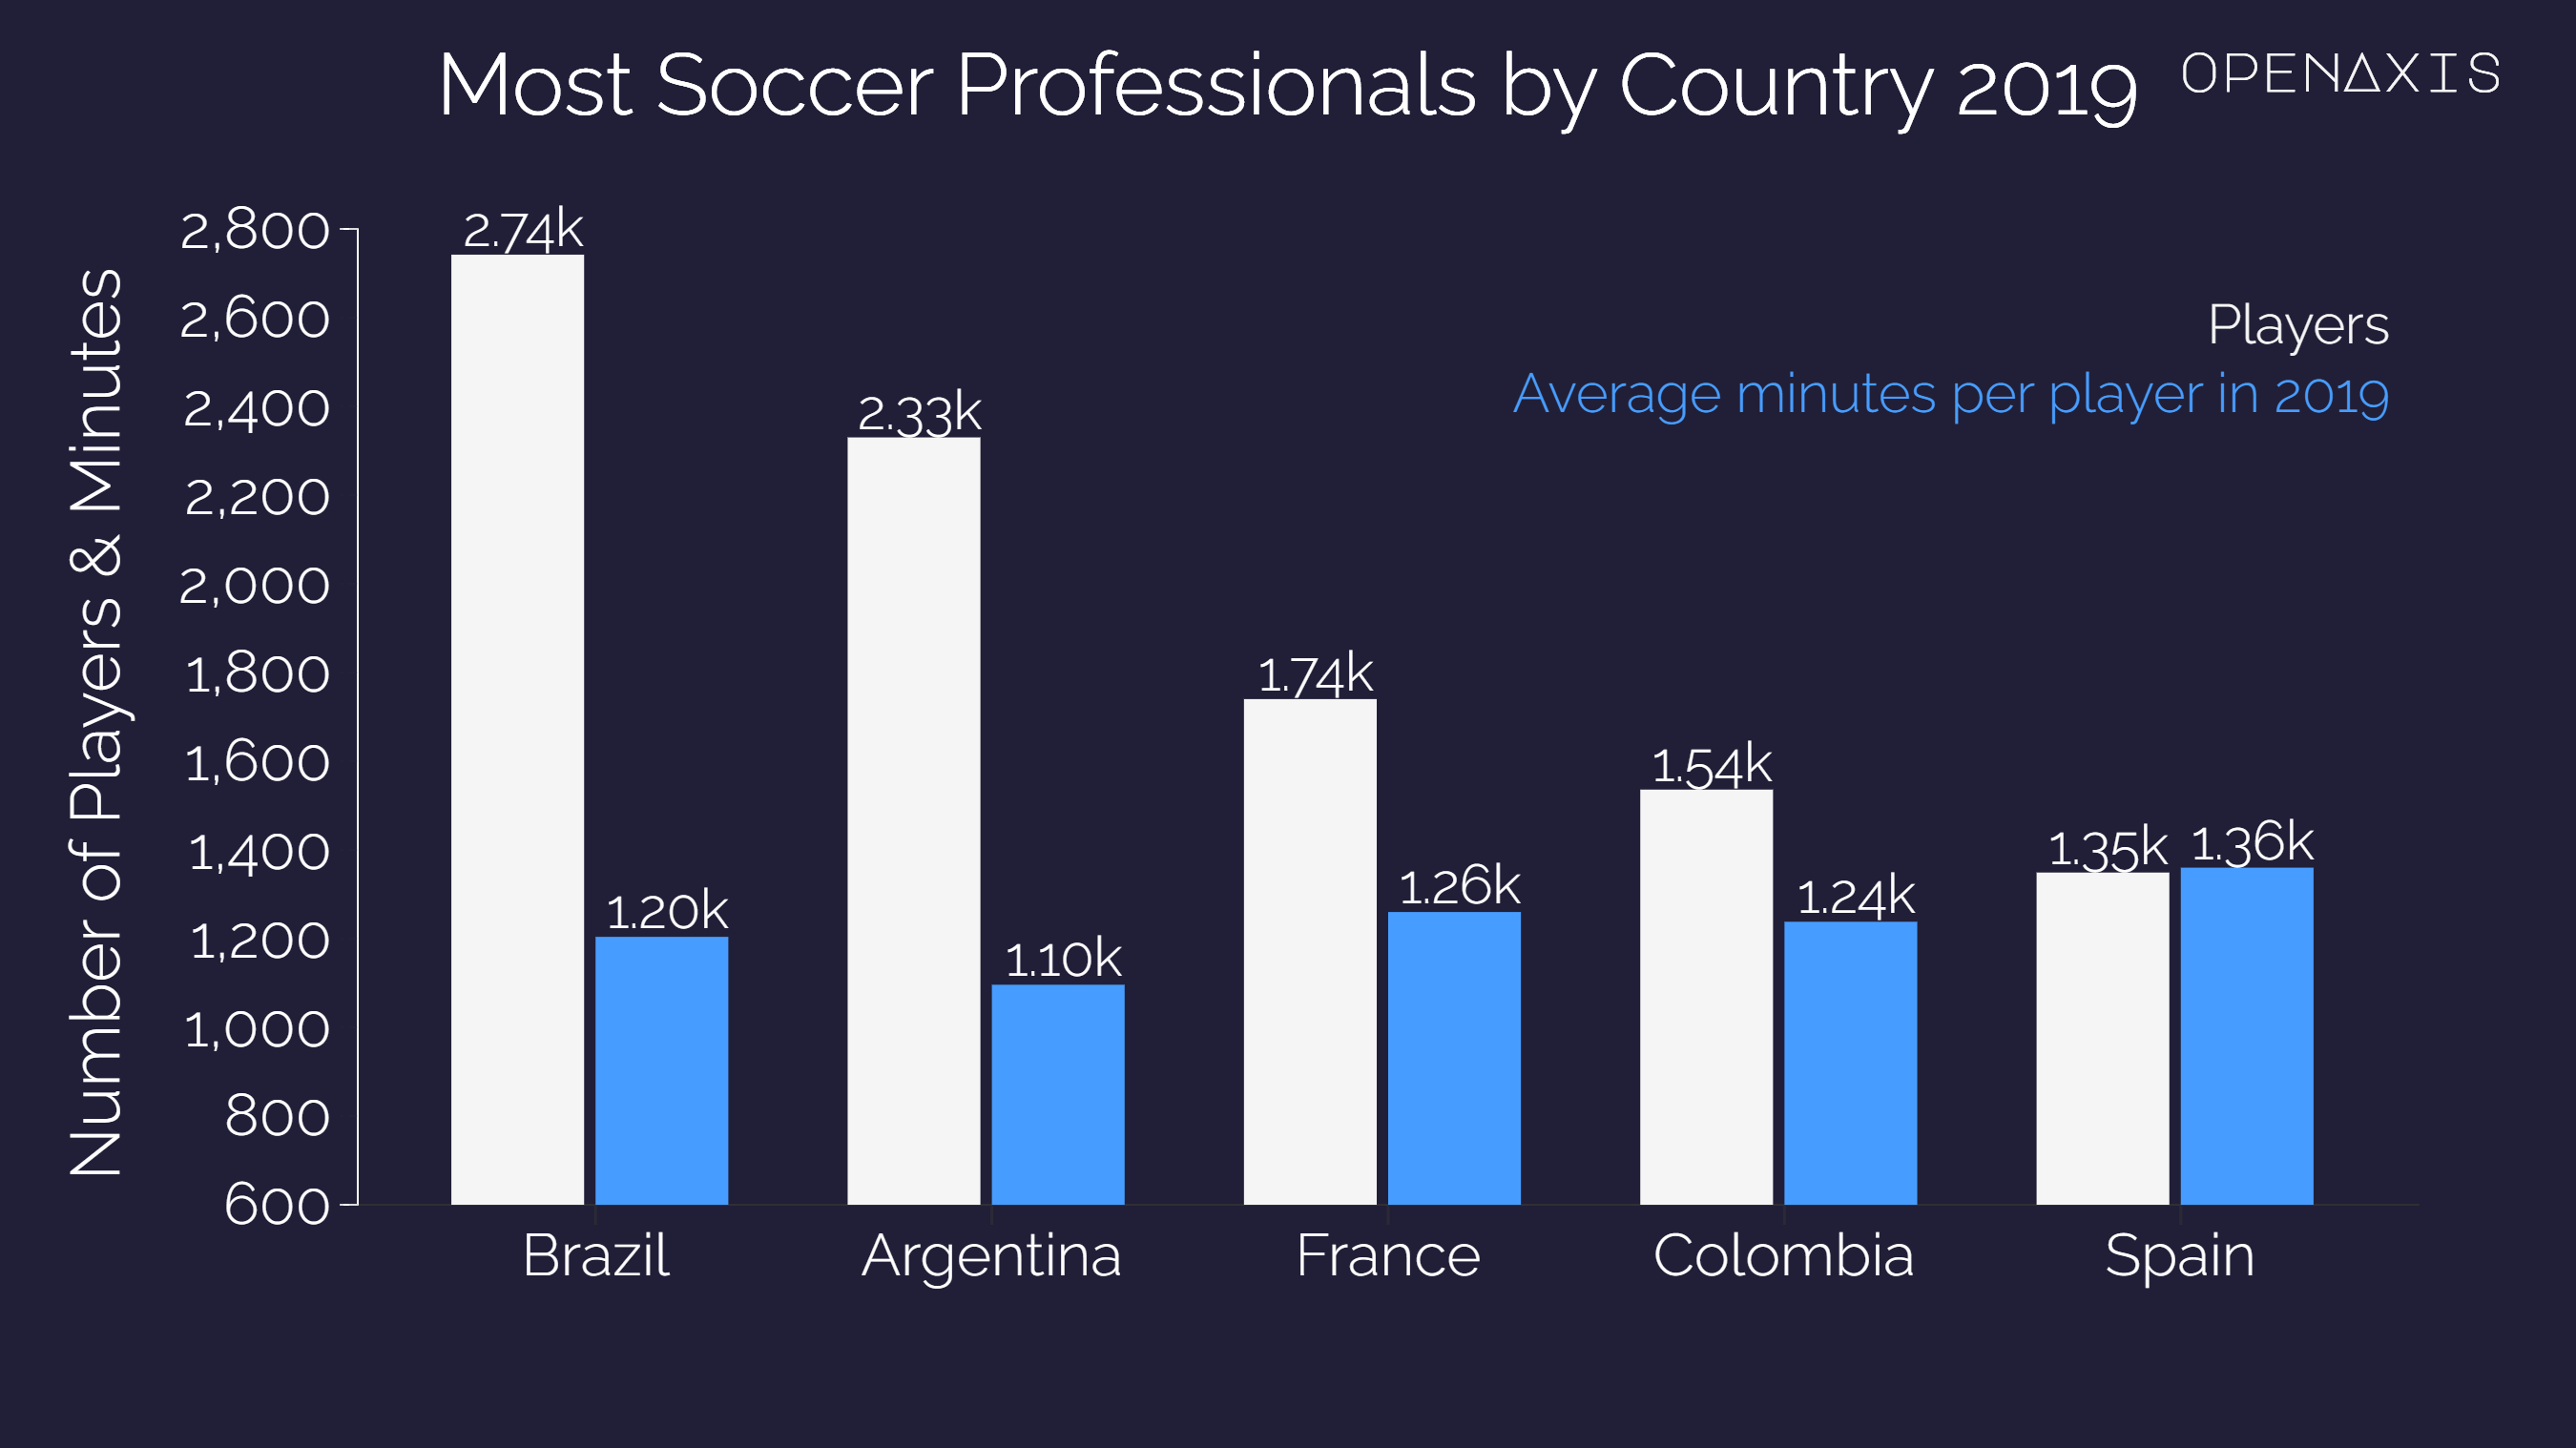 "Most Soccer Professionals by Country 2019"